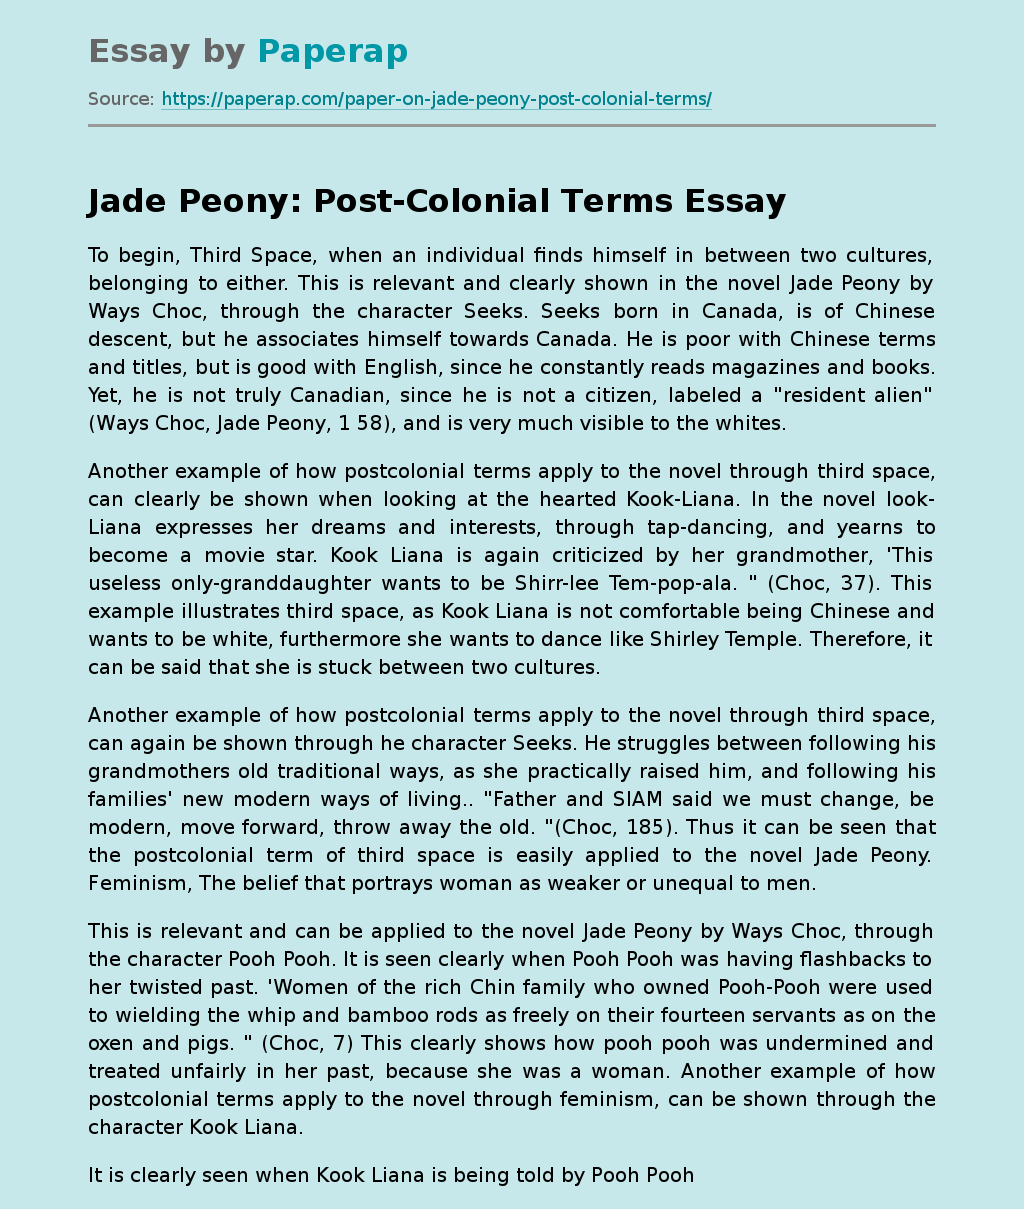 Use of Postcolonial Terms in the Literature